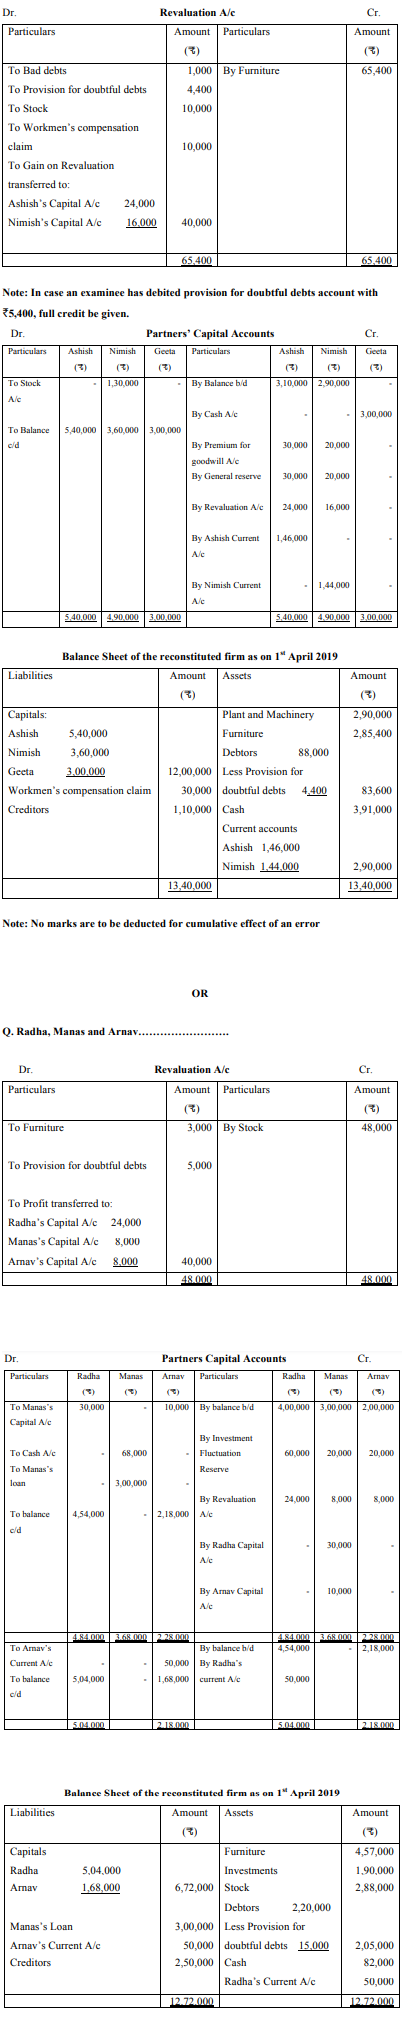 Ashish and Nimish were partners in a firm sharing profits and losses in 